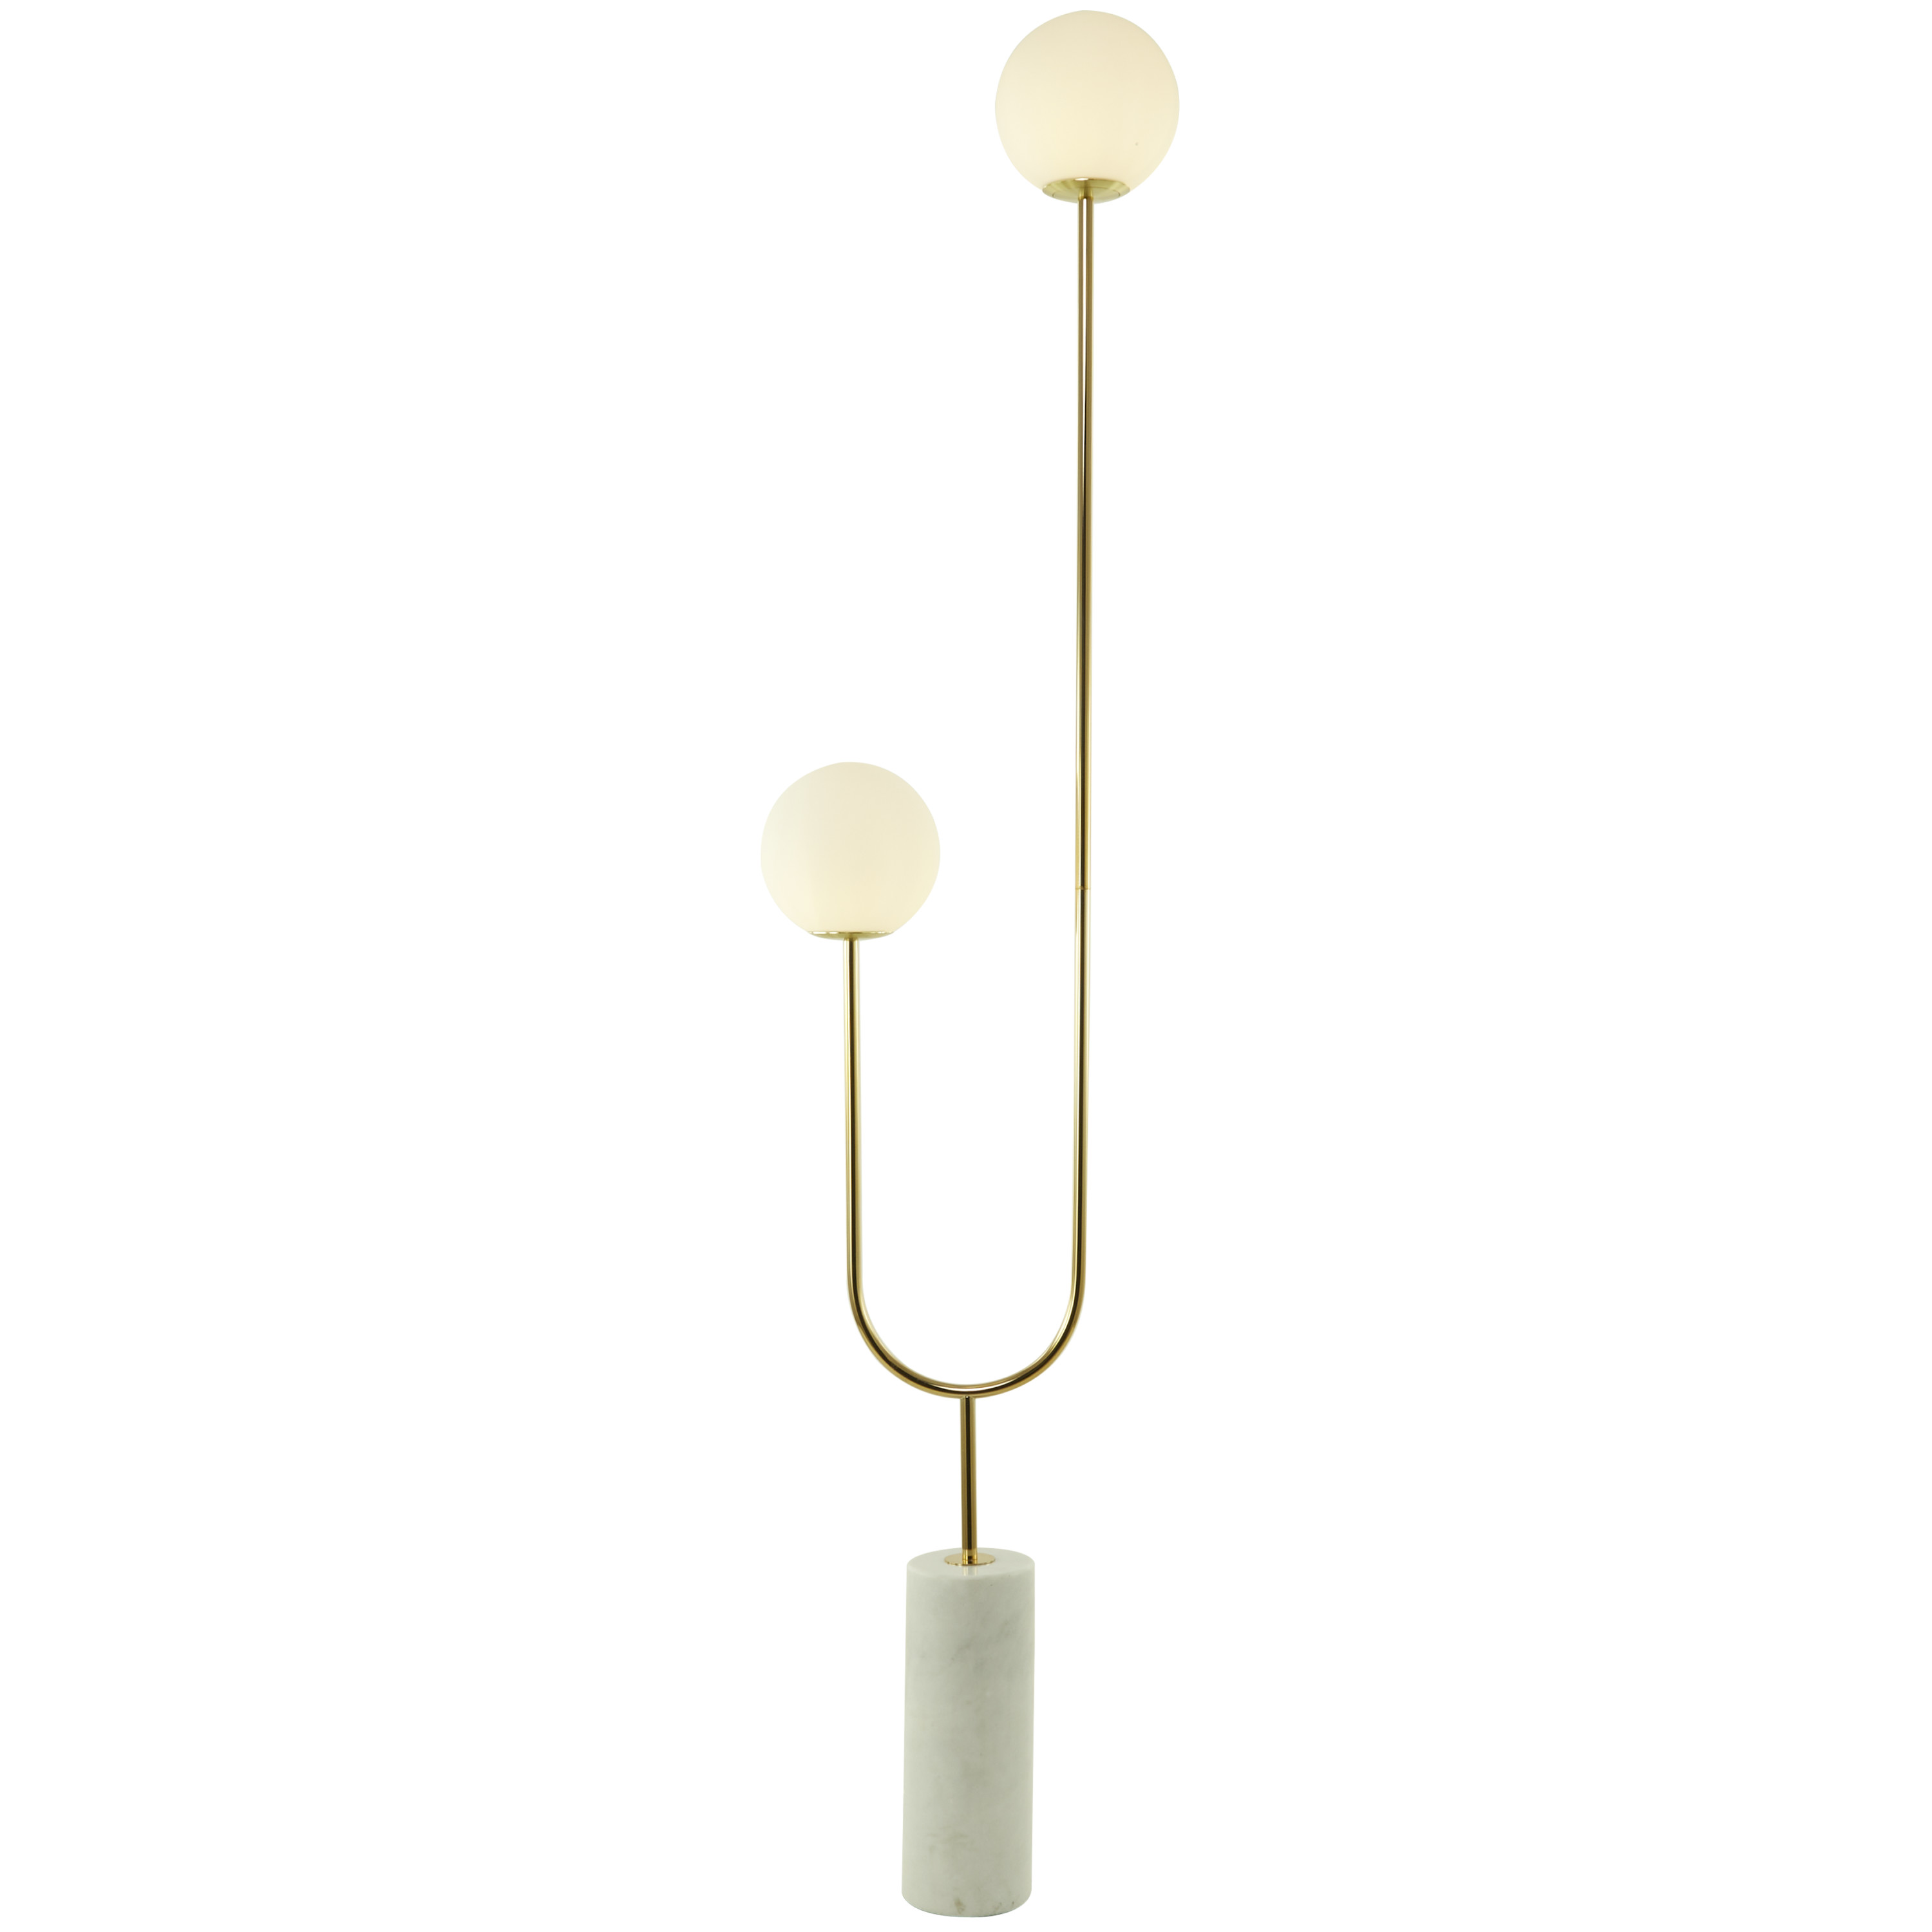 DecMode 73" 2 Light Orb Gold Floor Lamp with White Glass Shade - image 1 of 9